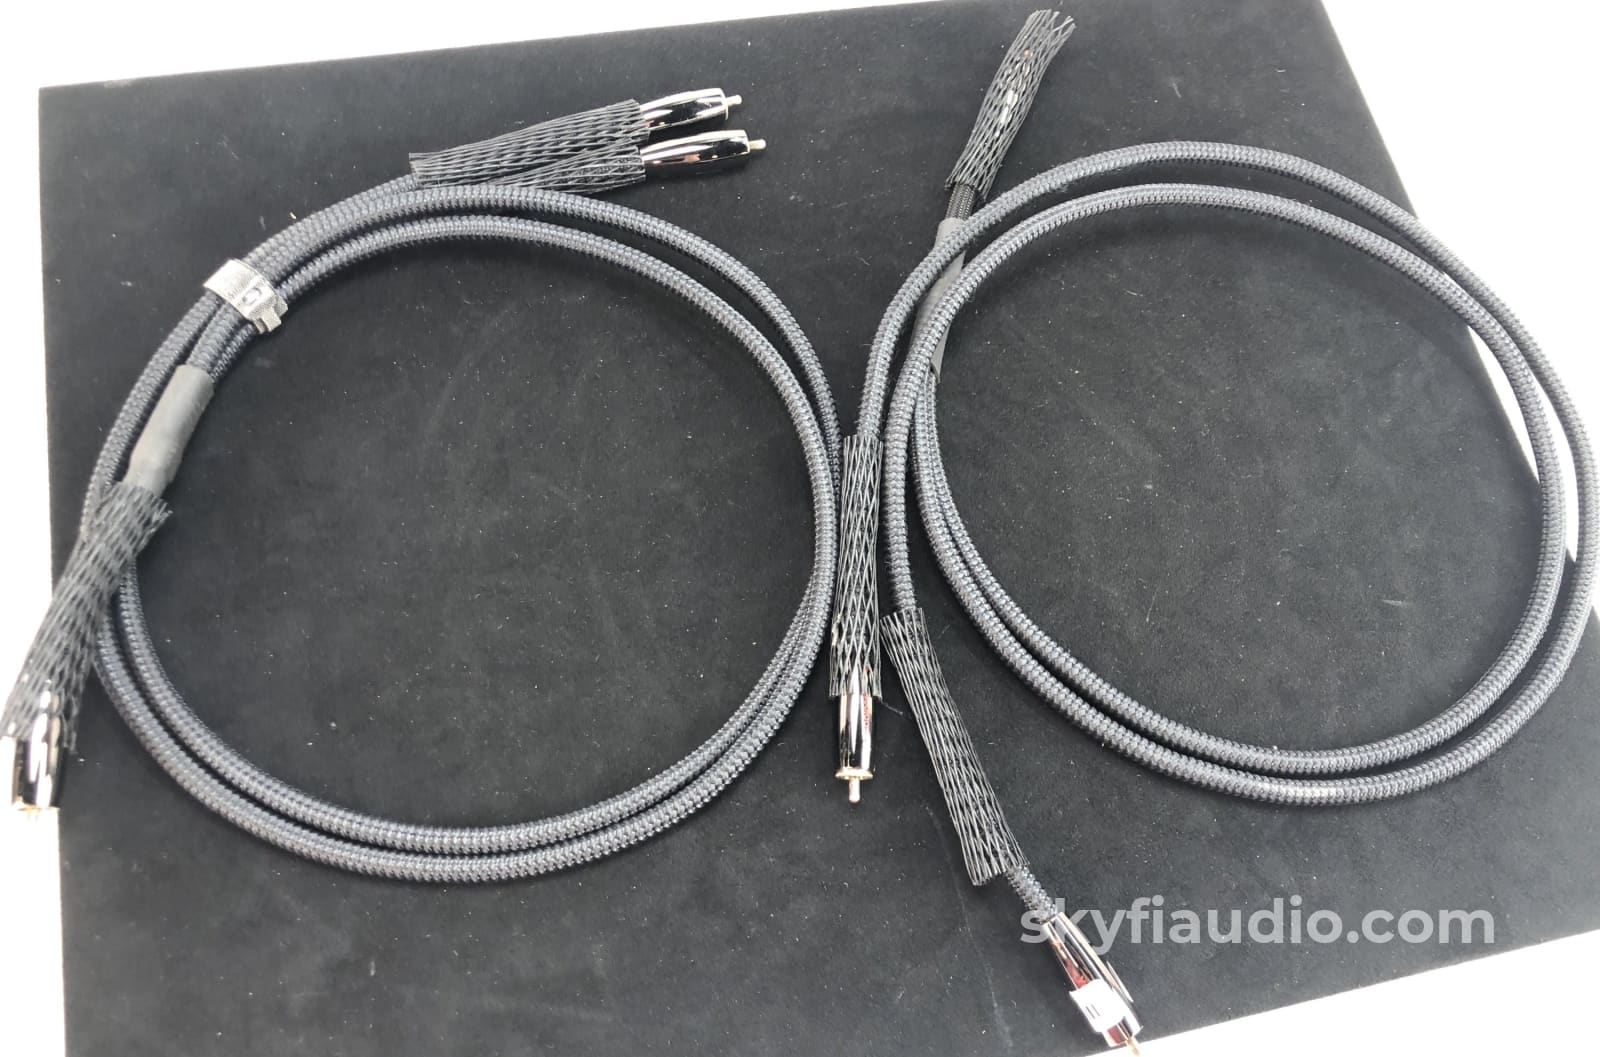 Audioquest River Series - Yukon Rca Y-Splitter Cable Custom Made By 1M Cables